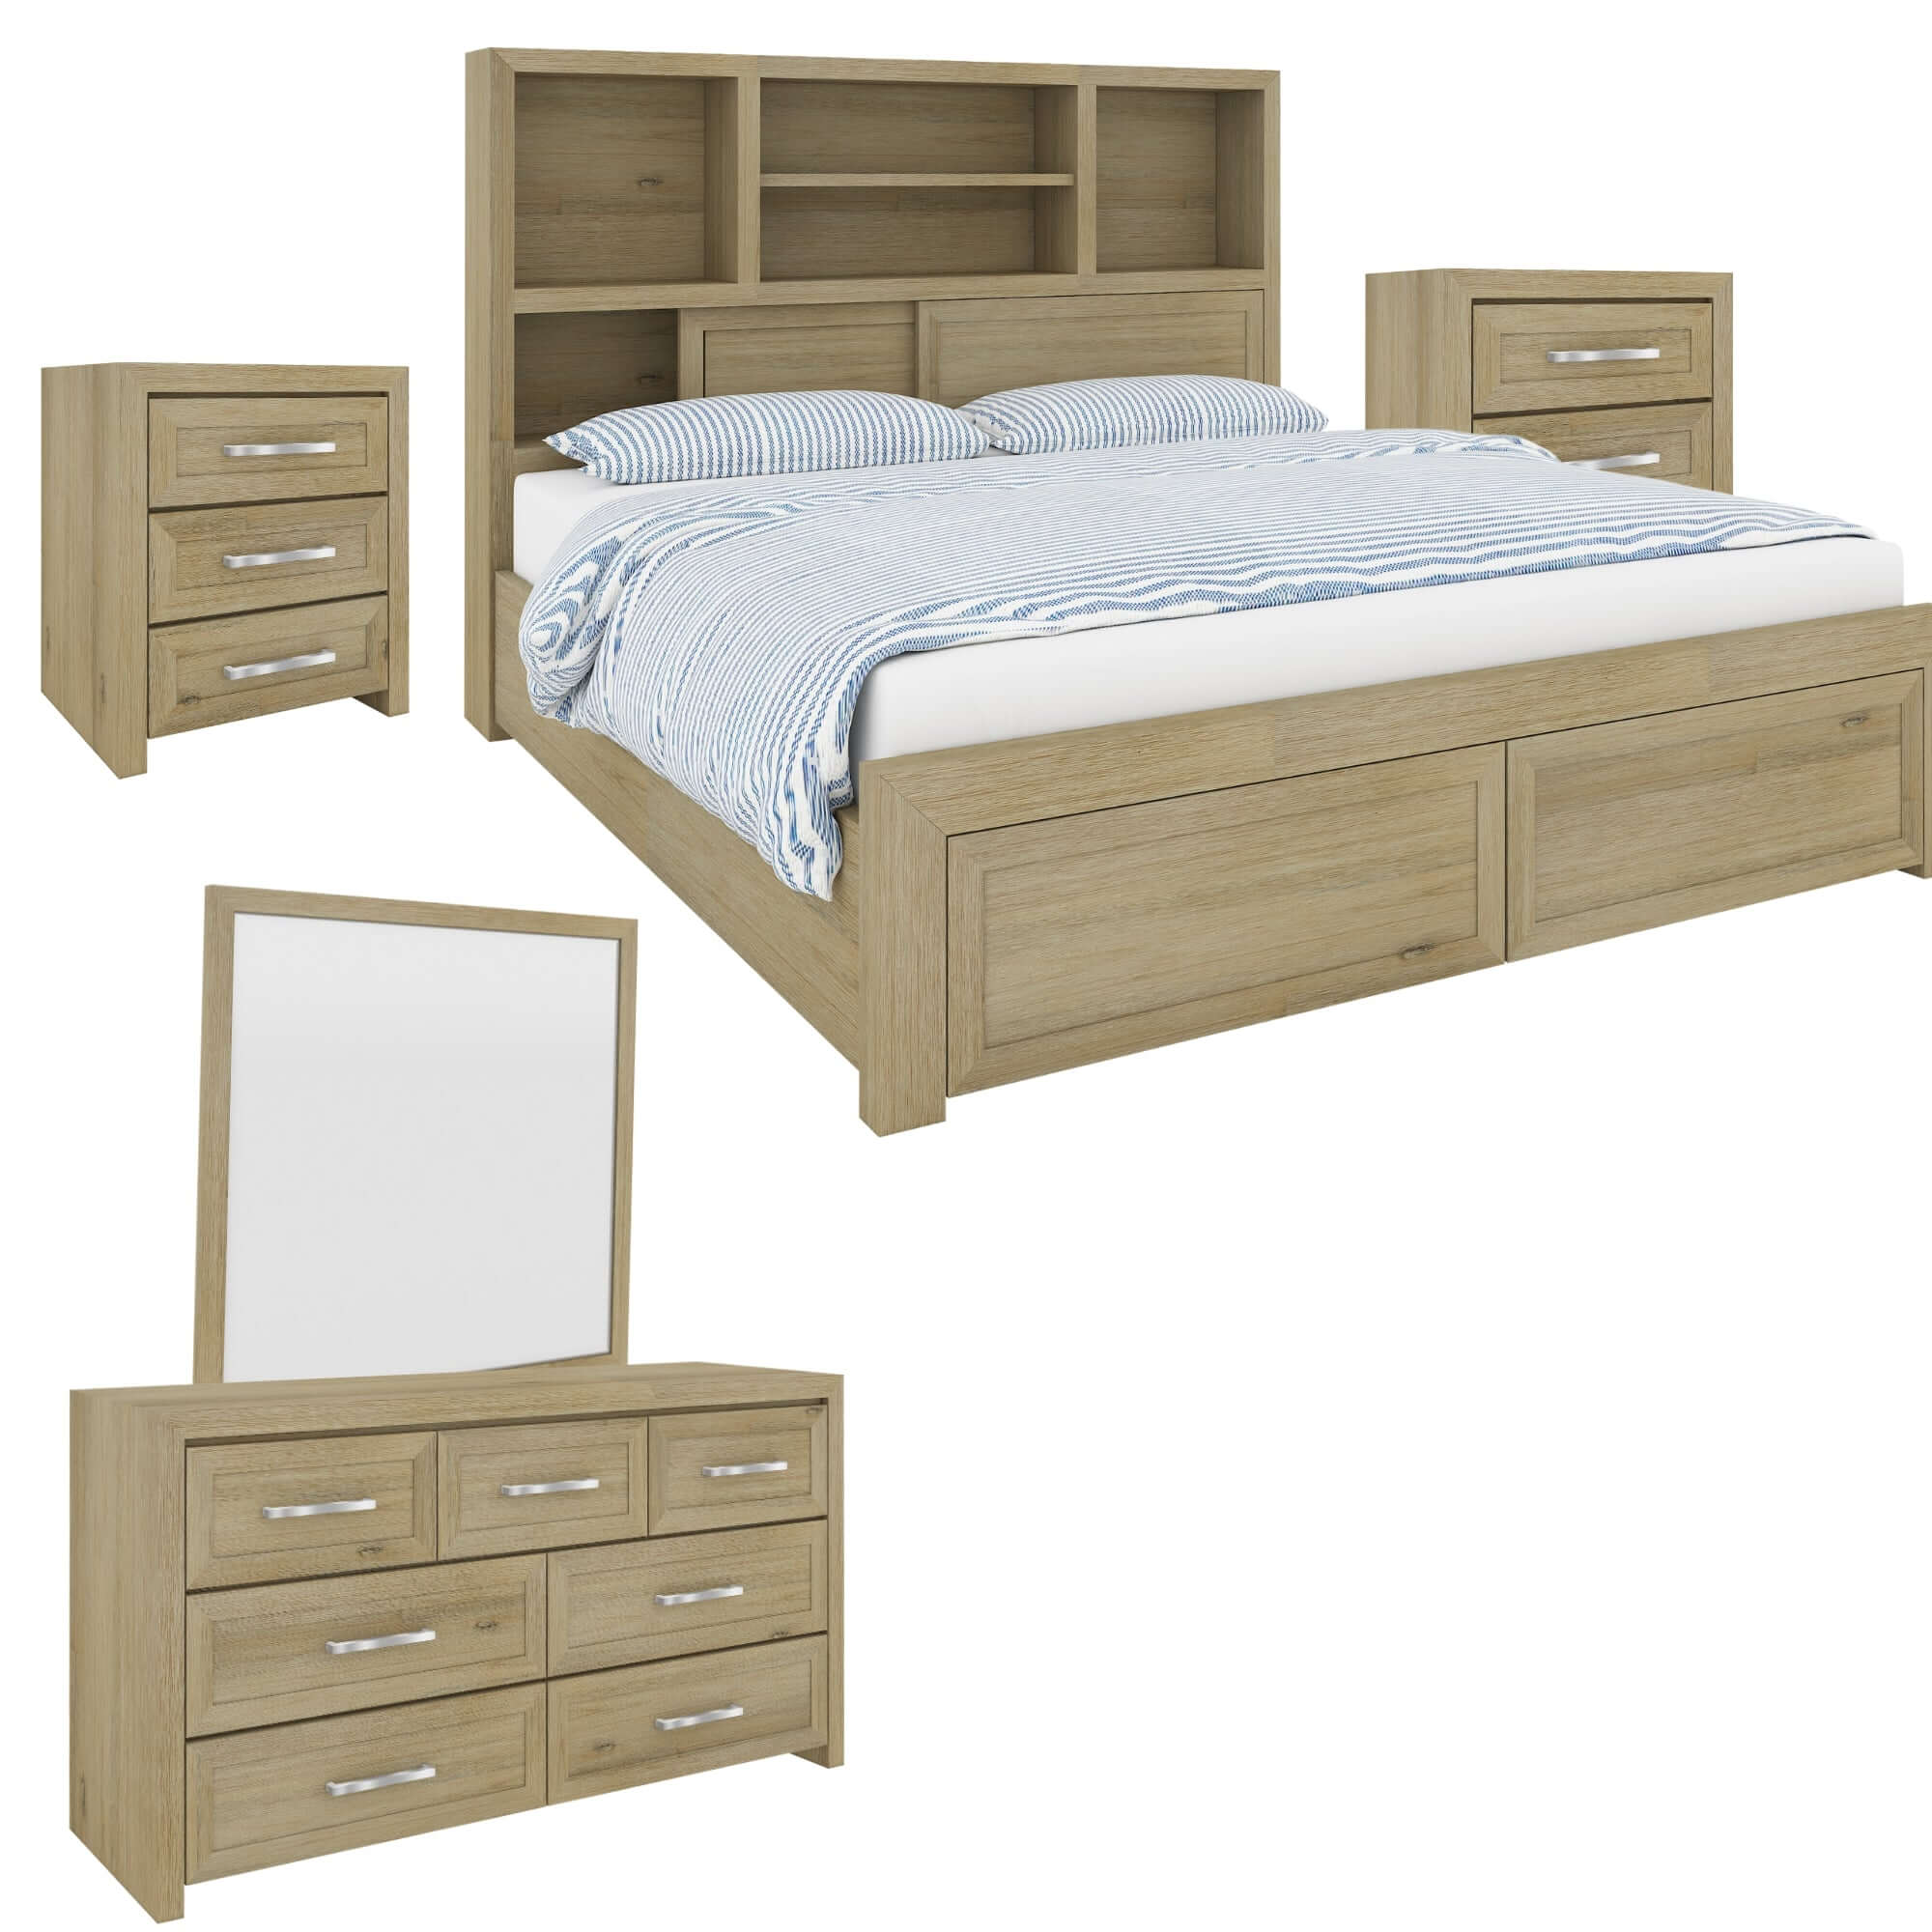 Gracelyn Queen Bed Frame Solid Wood Mattress Base With Storage Drawers - Smoke-Upinteriors